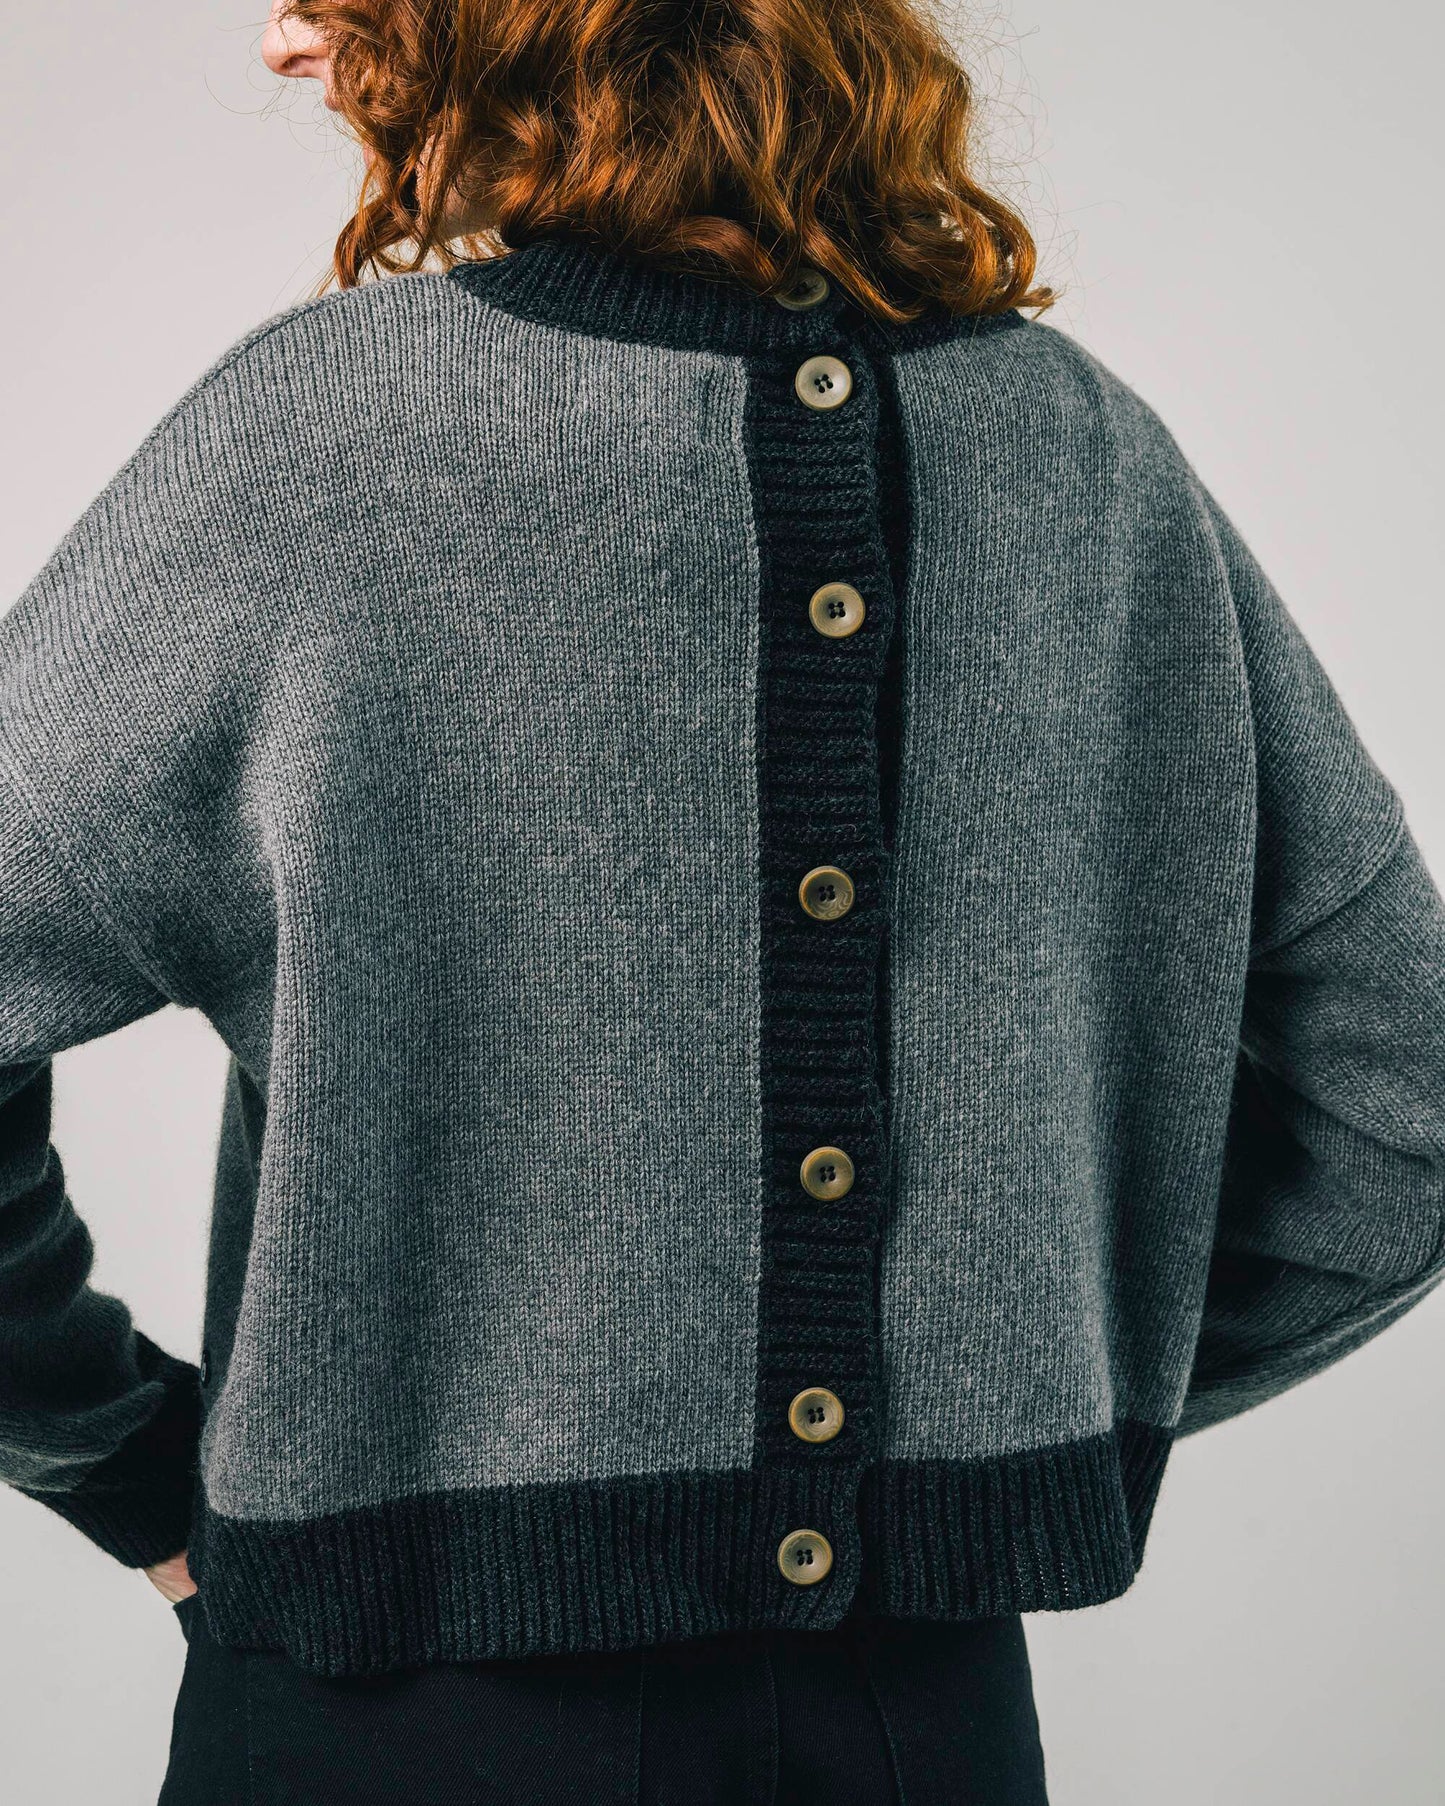 Back Buttons Sweater Grey